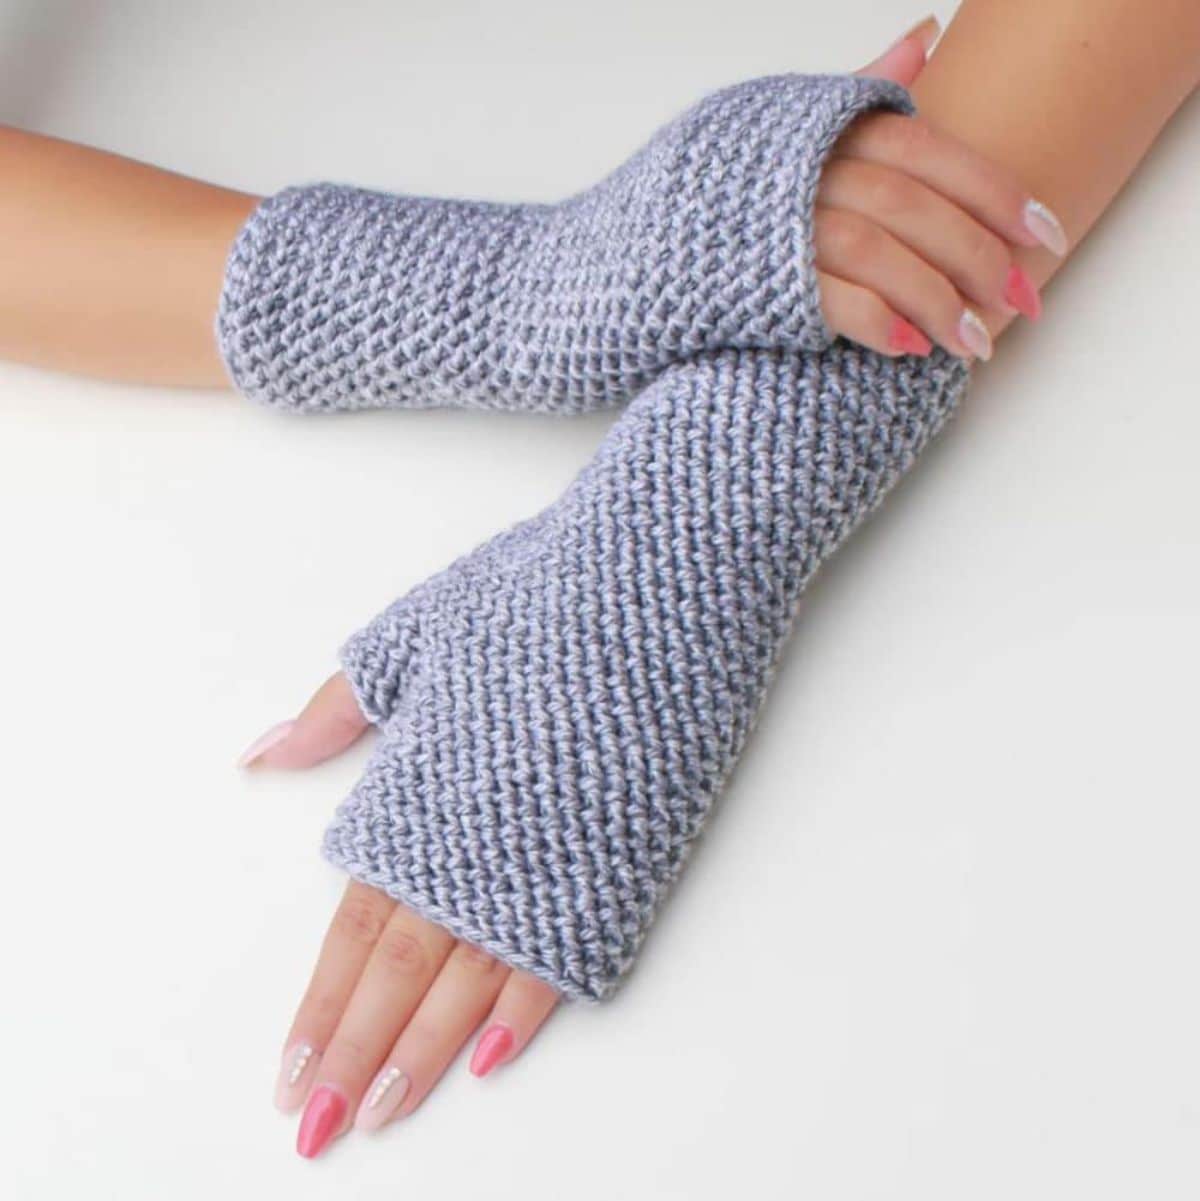 Manicured hands wearing gray fingerless gloves that cover the entire wrist on a white background.